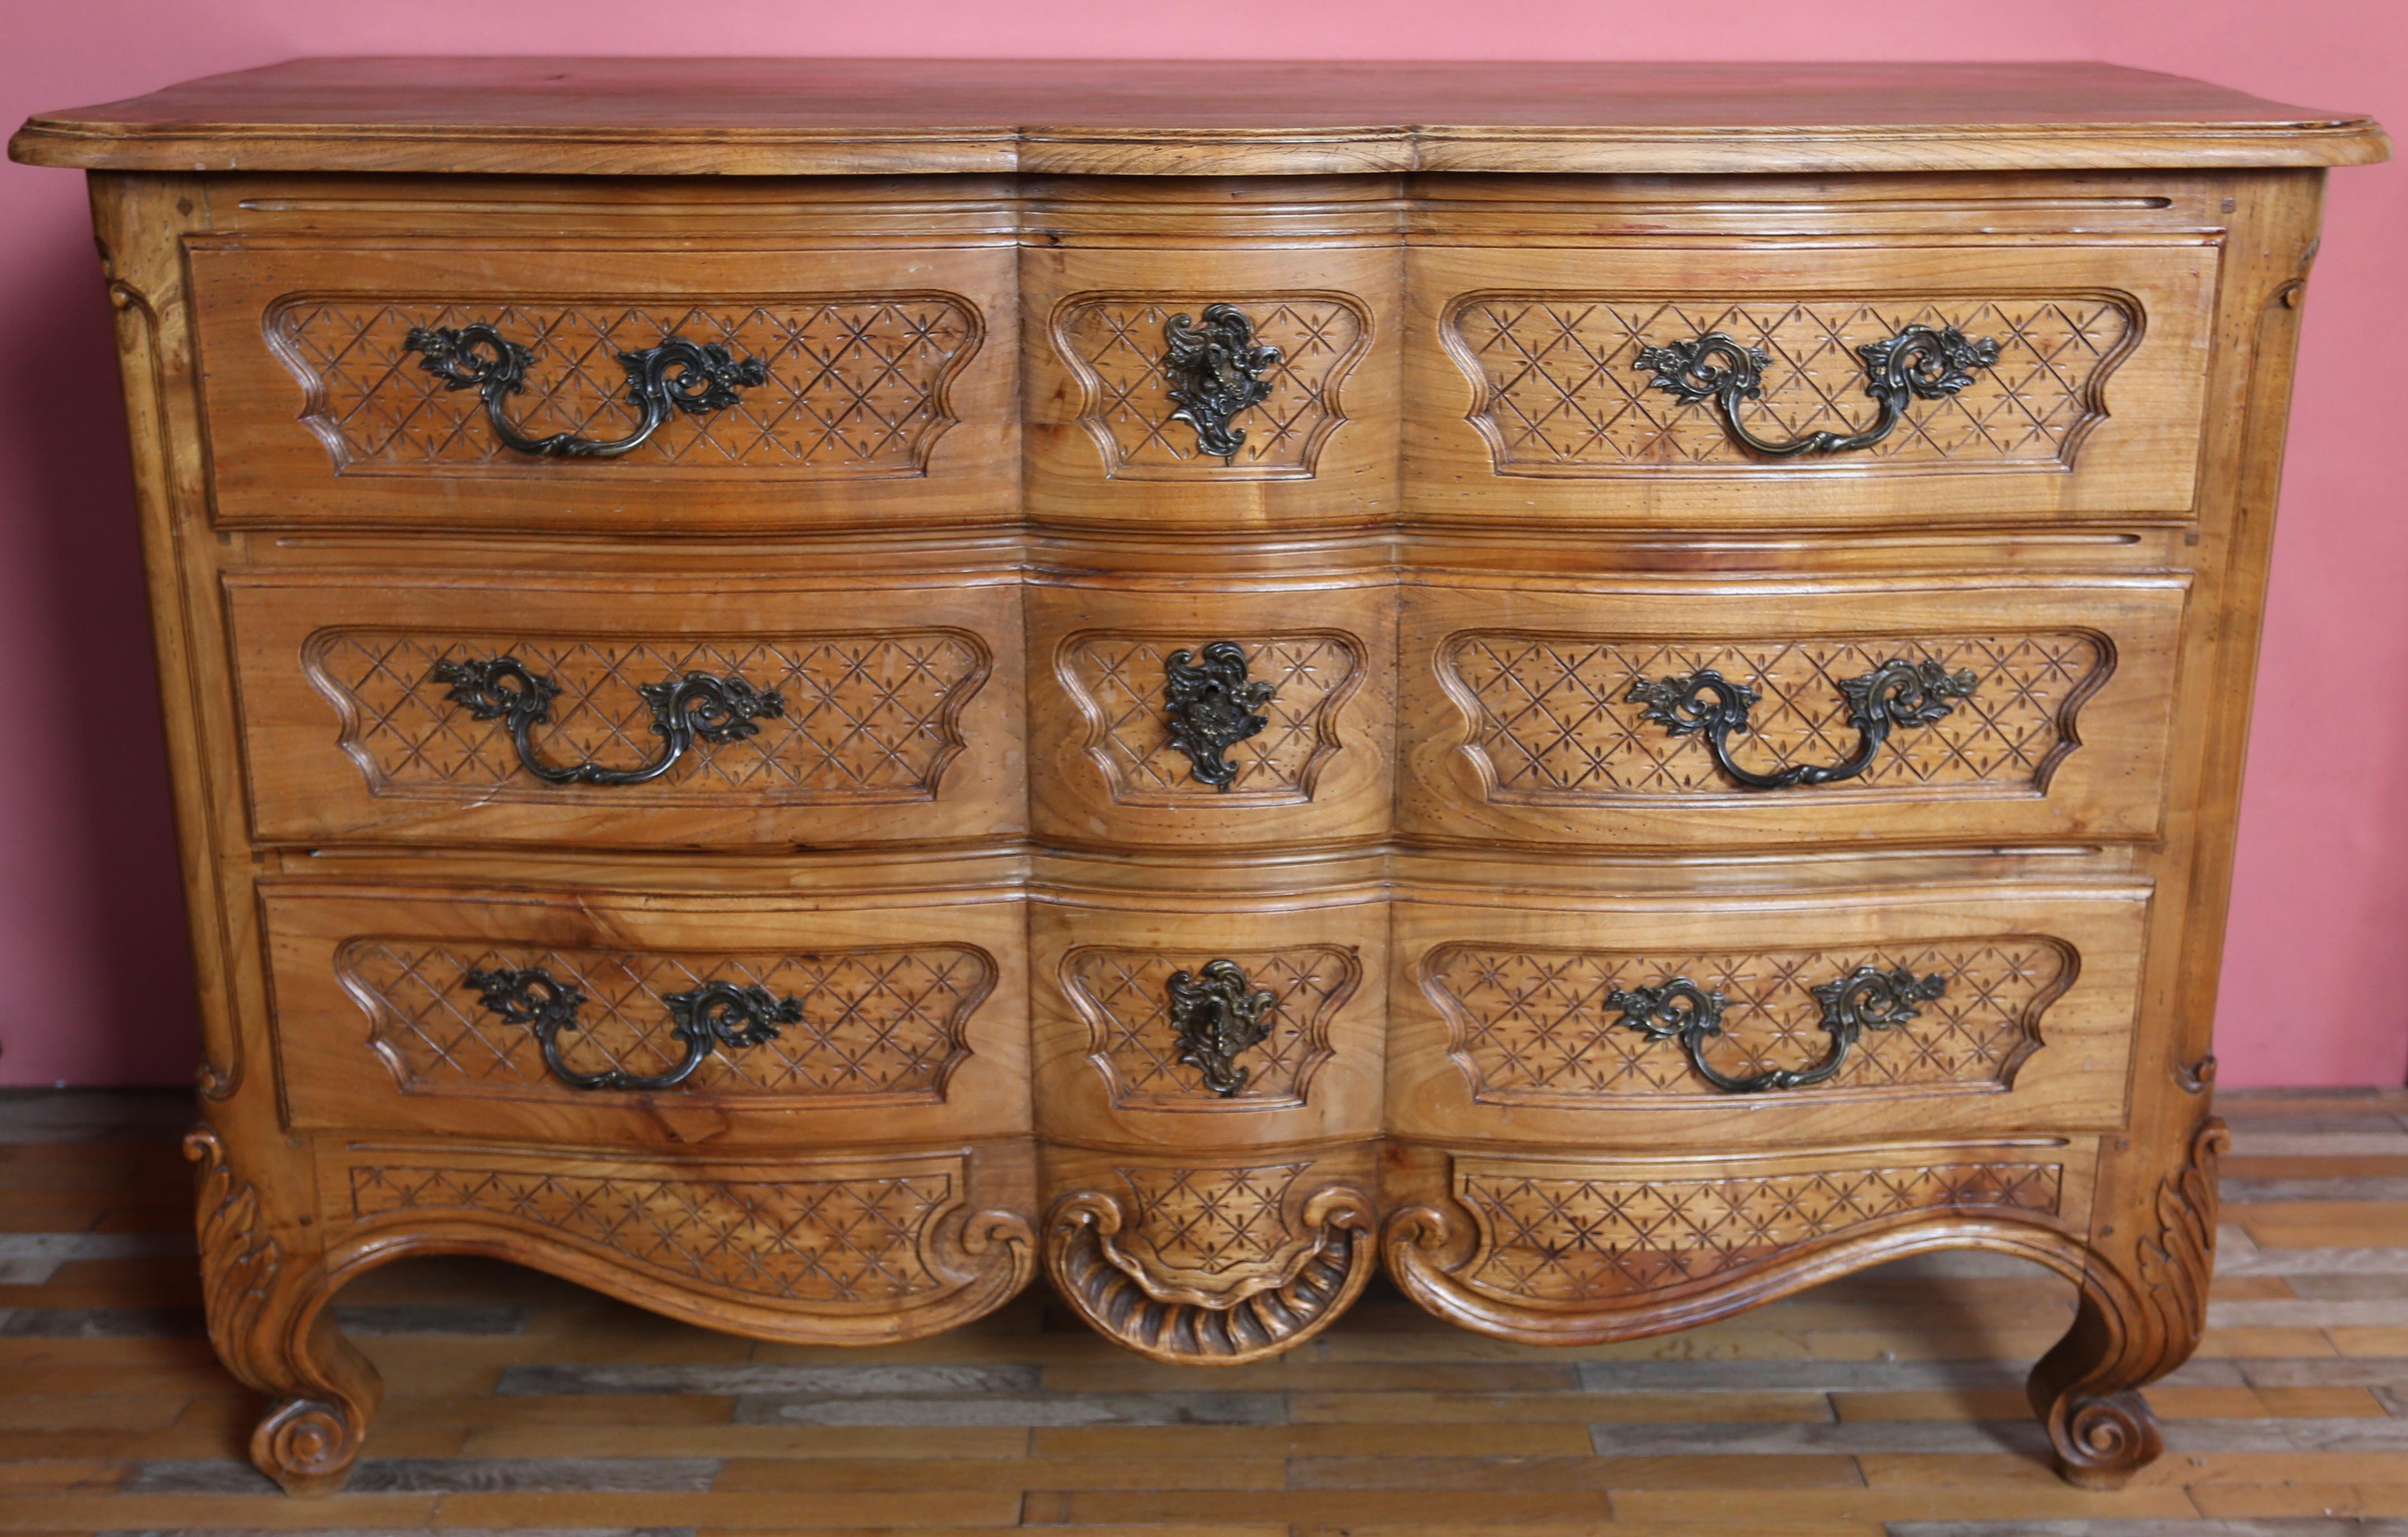 Antique cherry wood chest of drawers